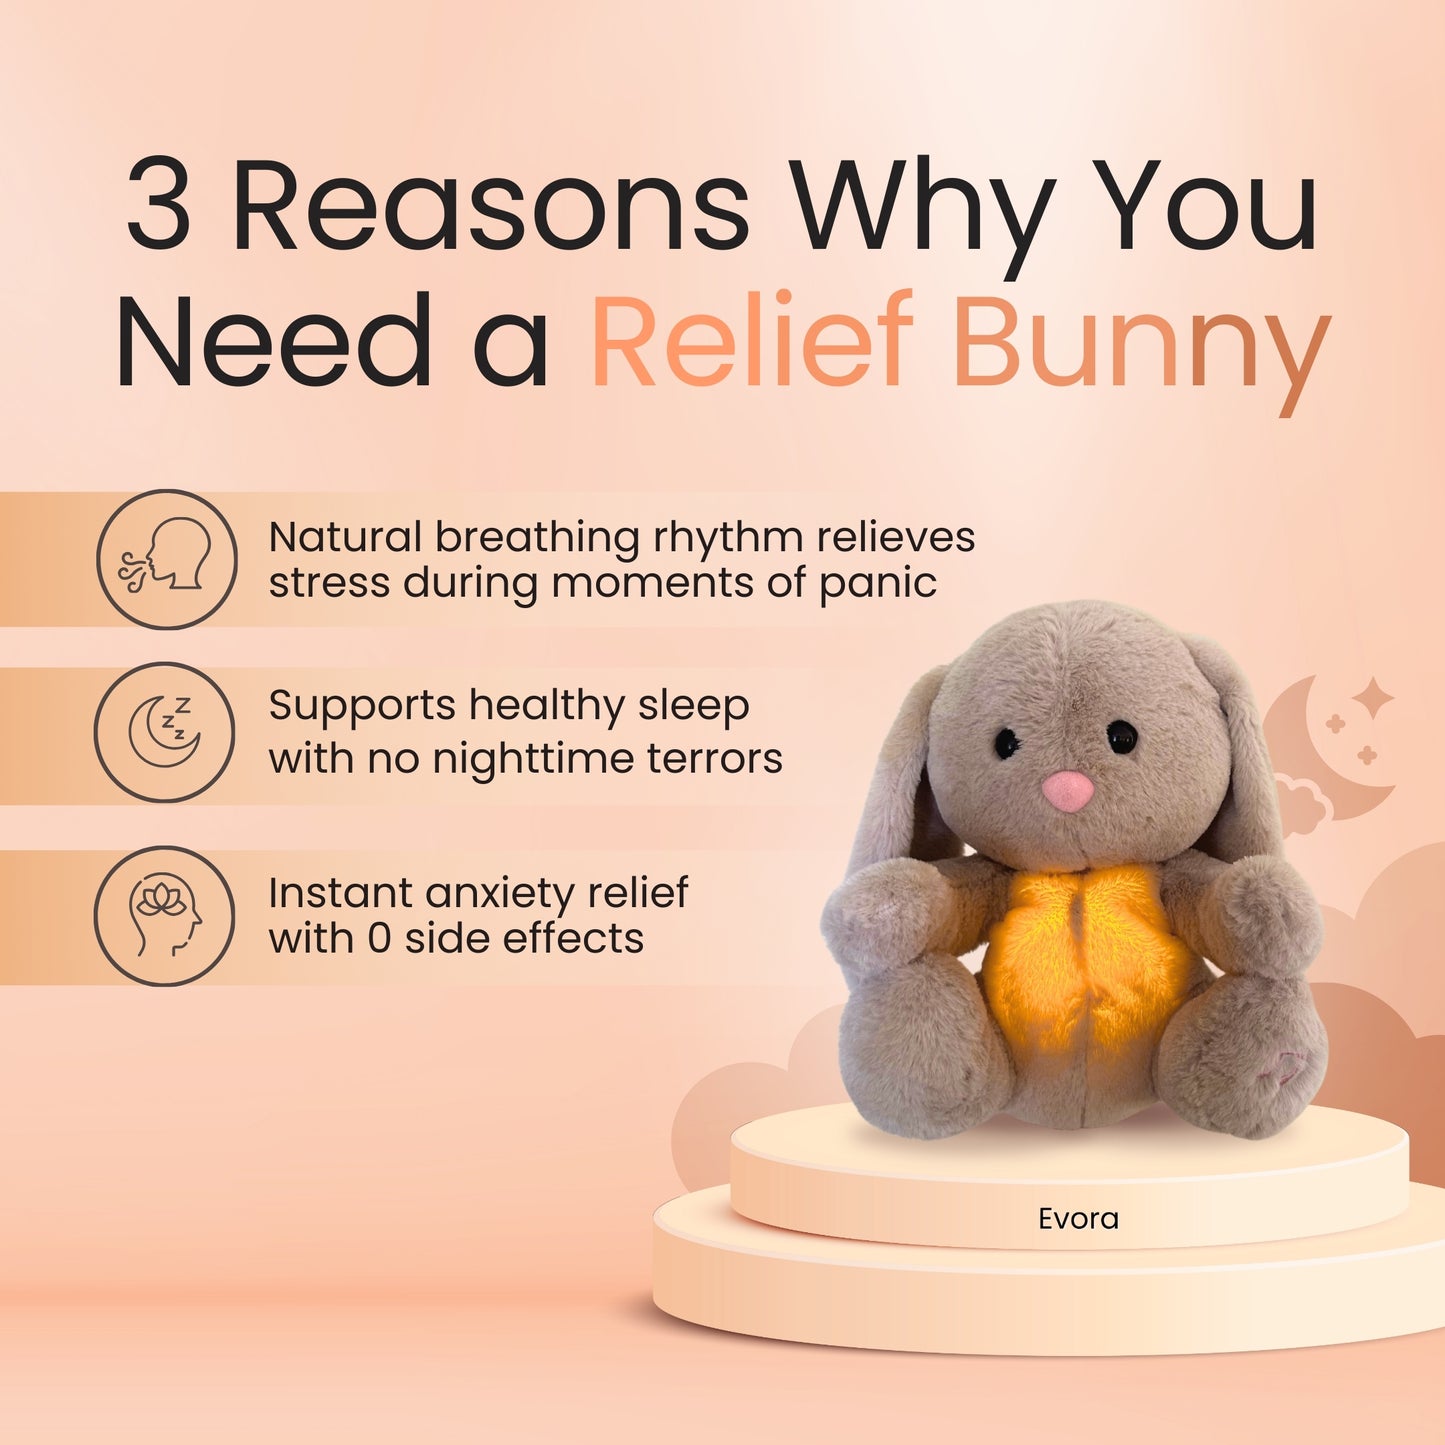 THE RELIEF BUNNY™